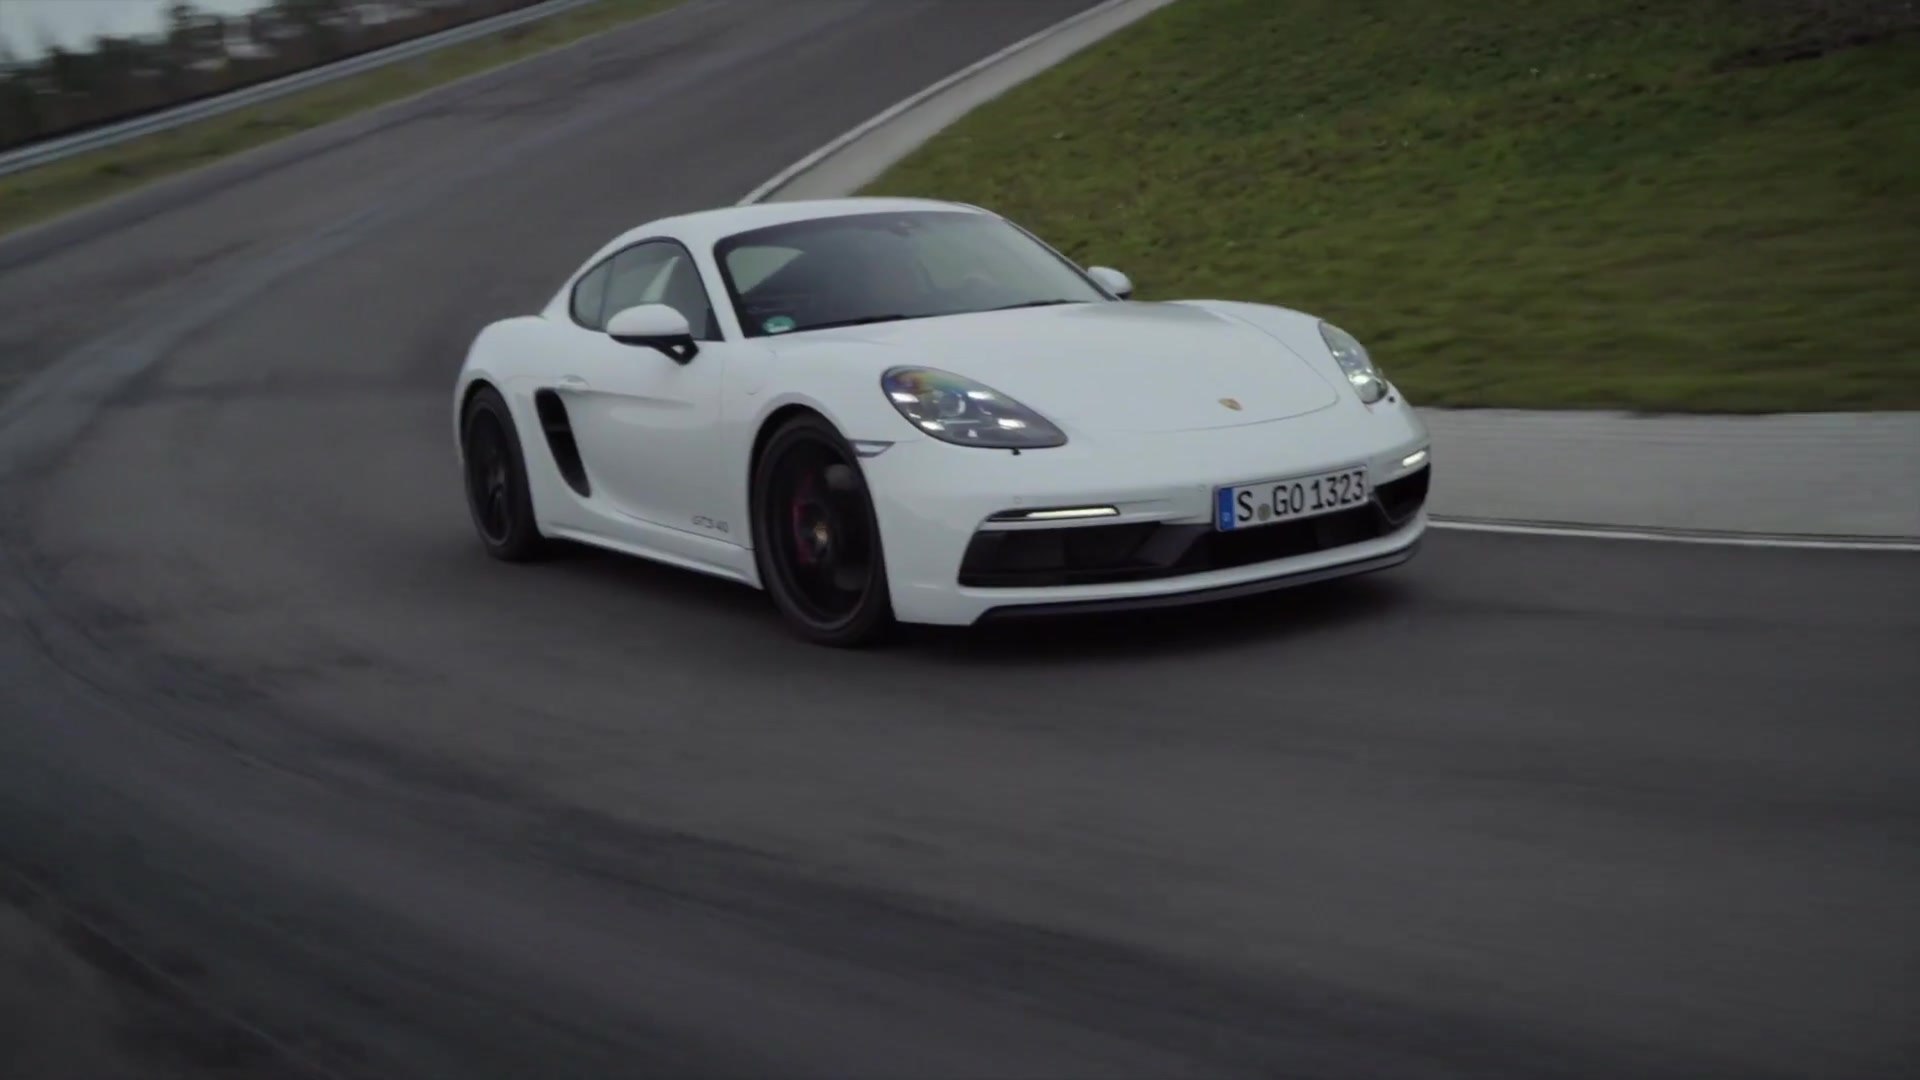 The New Porsche 718 Cayman Gts 4 0 In White Driving Video Video Dailymotion